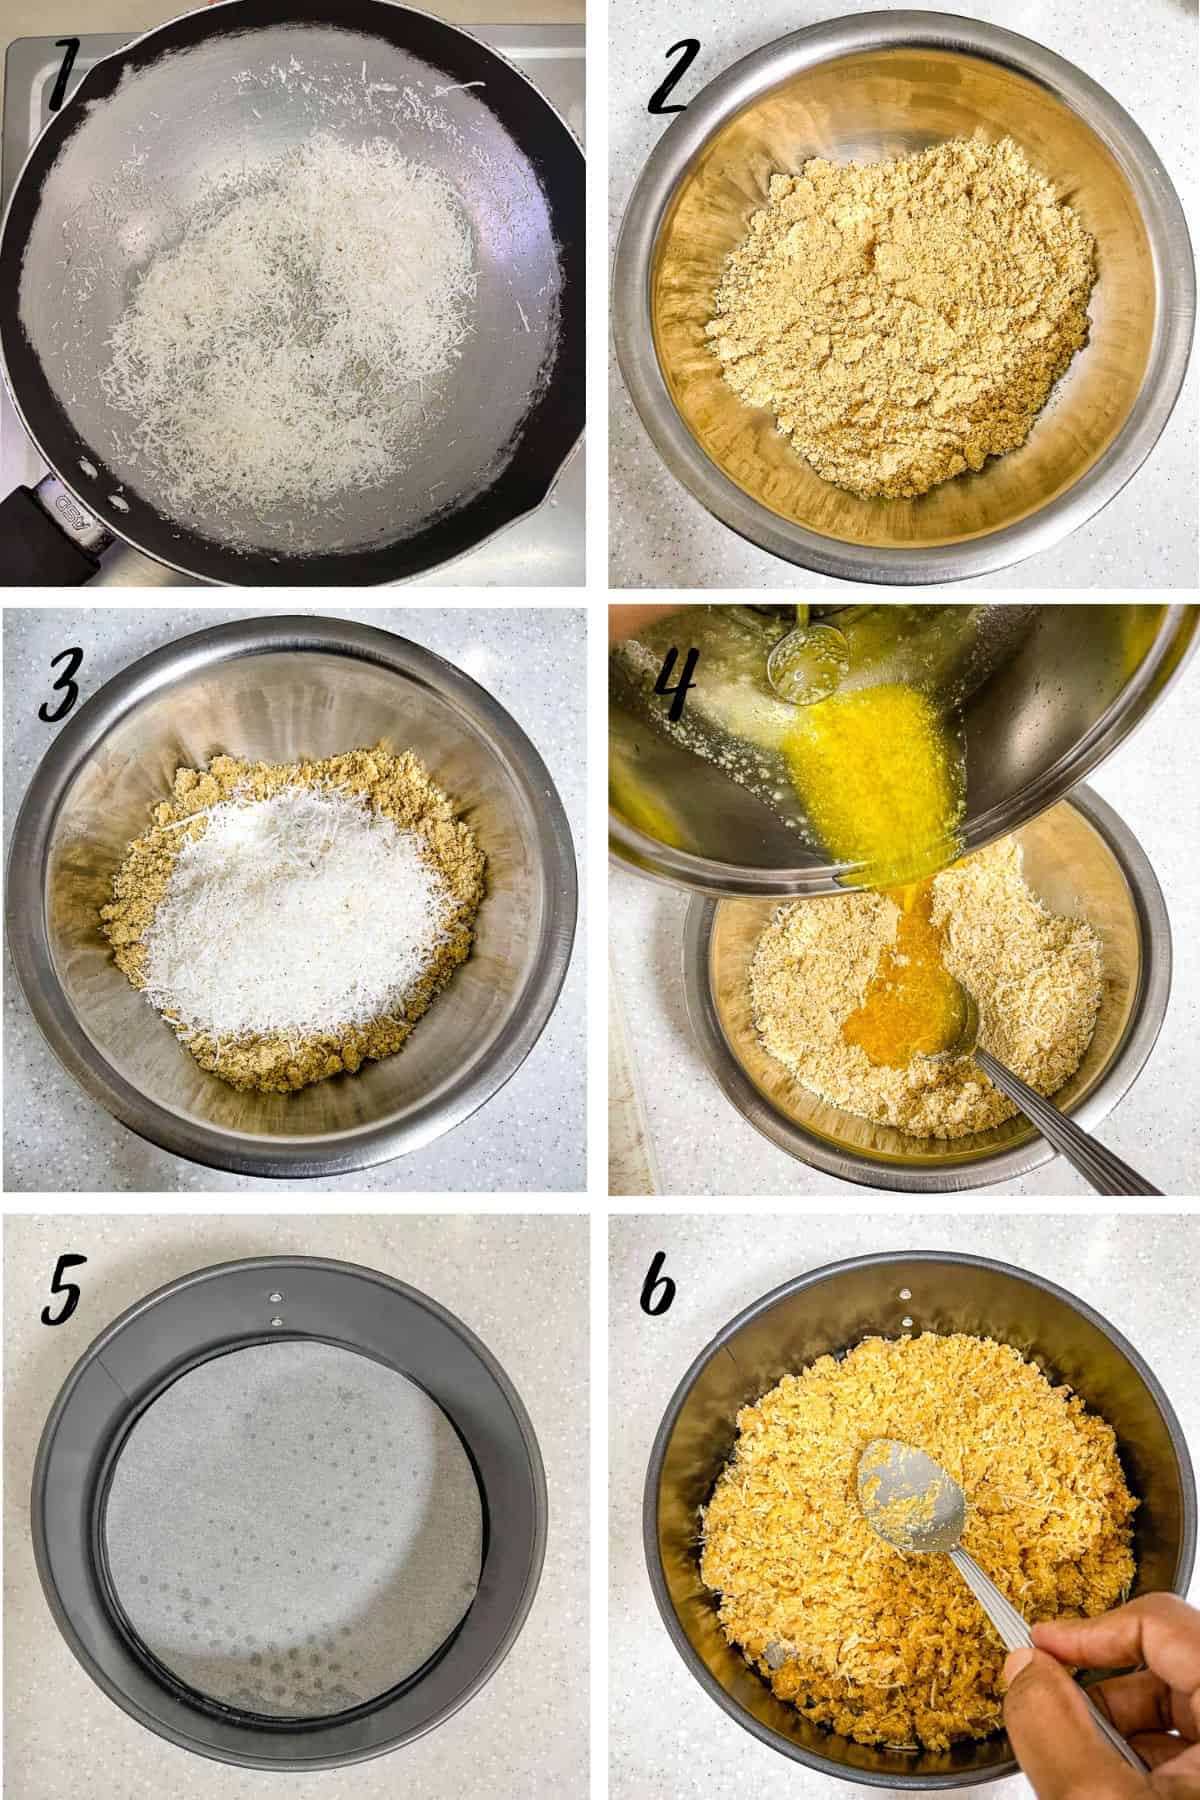 A poster of 6 images showing how to make cheesecake crust with coconut and cookie crumbs.